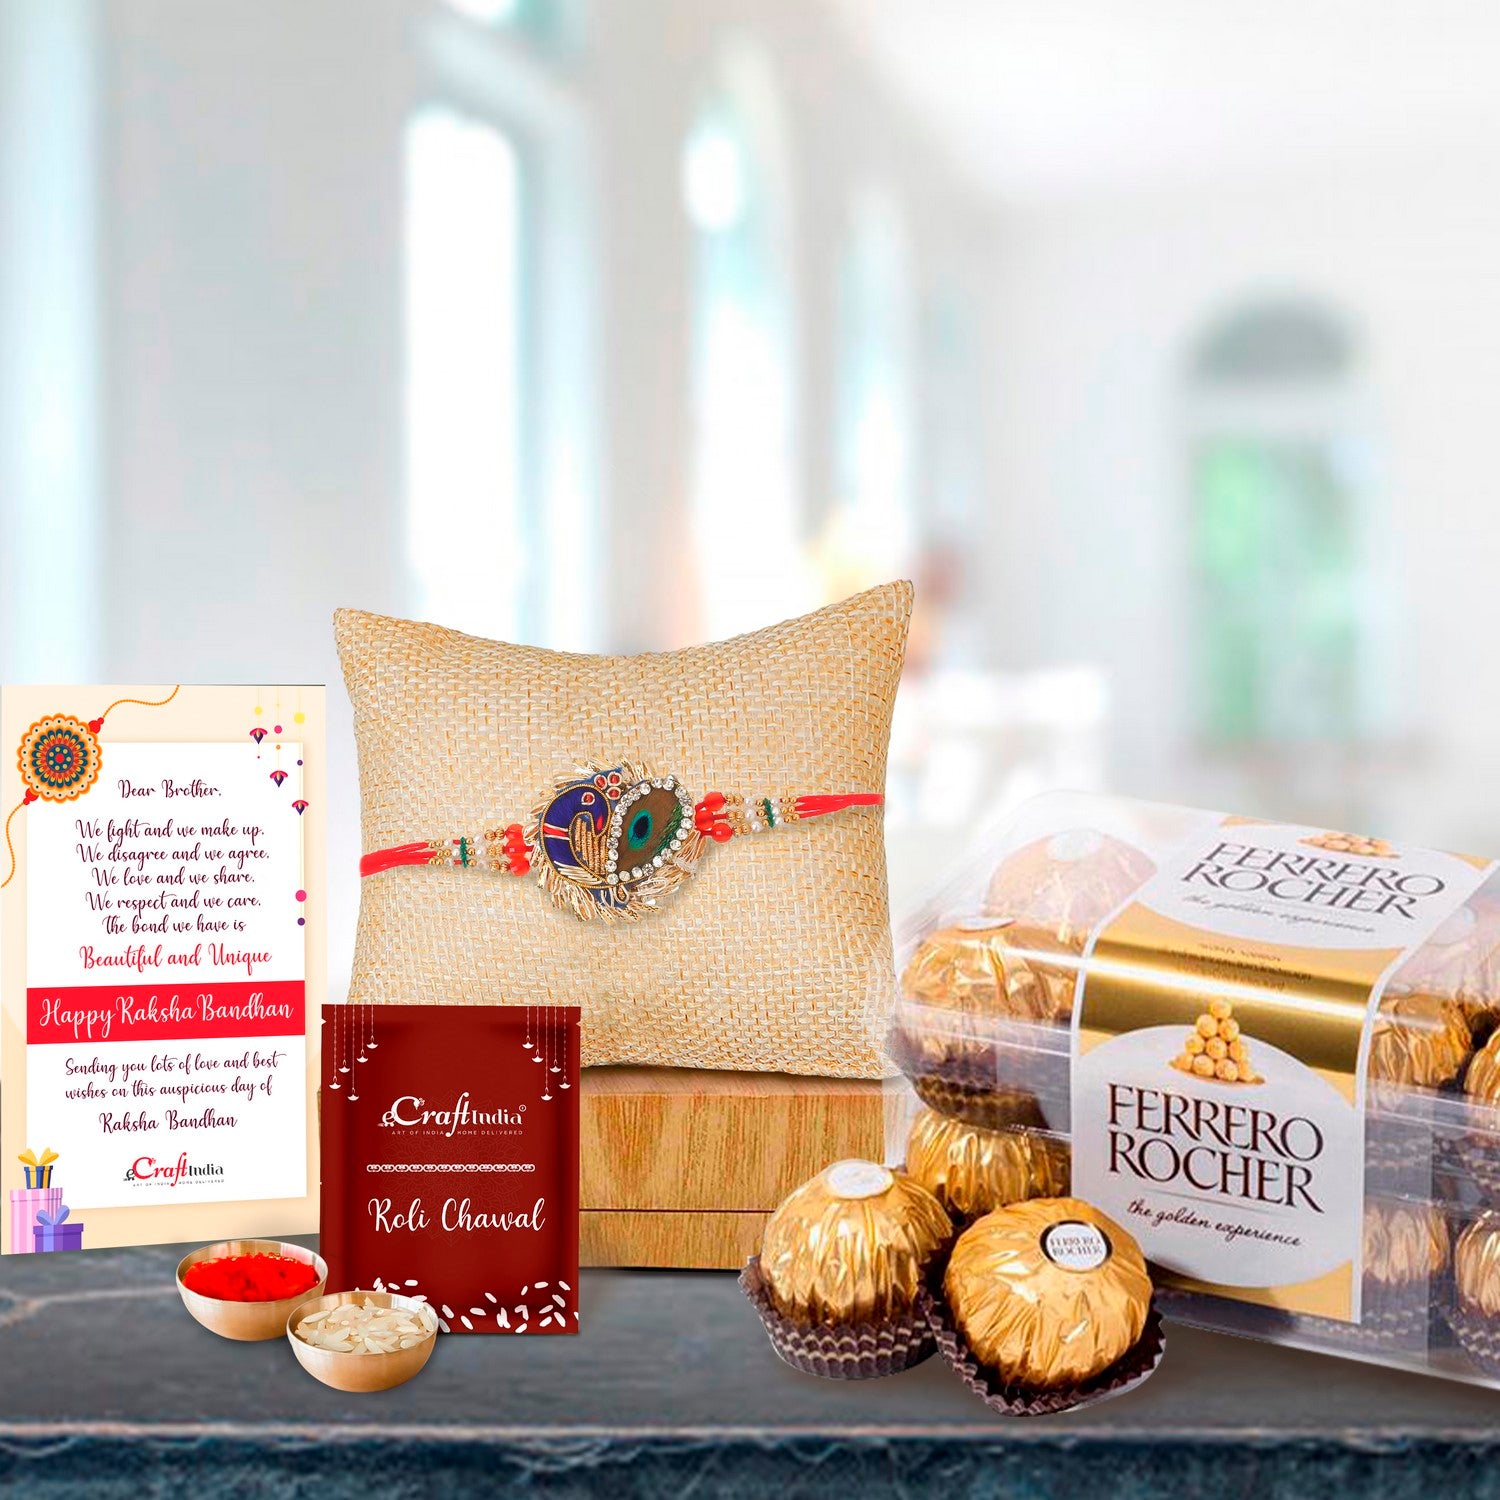 Designer Rakhi with Ferrero Rocher (16 pcs) and Roli Chawal Pack, Best Wishes Greeting Card